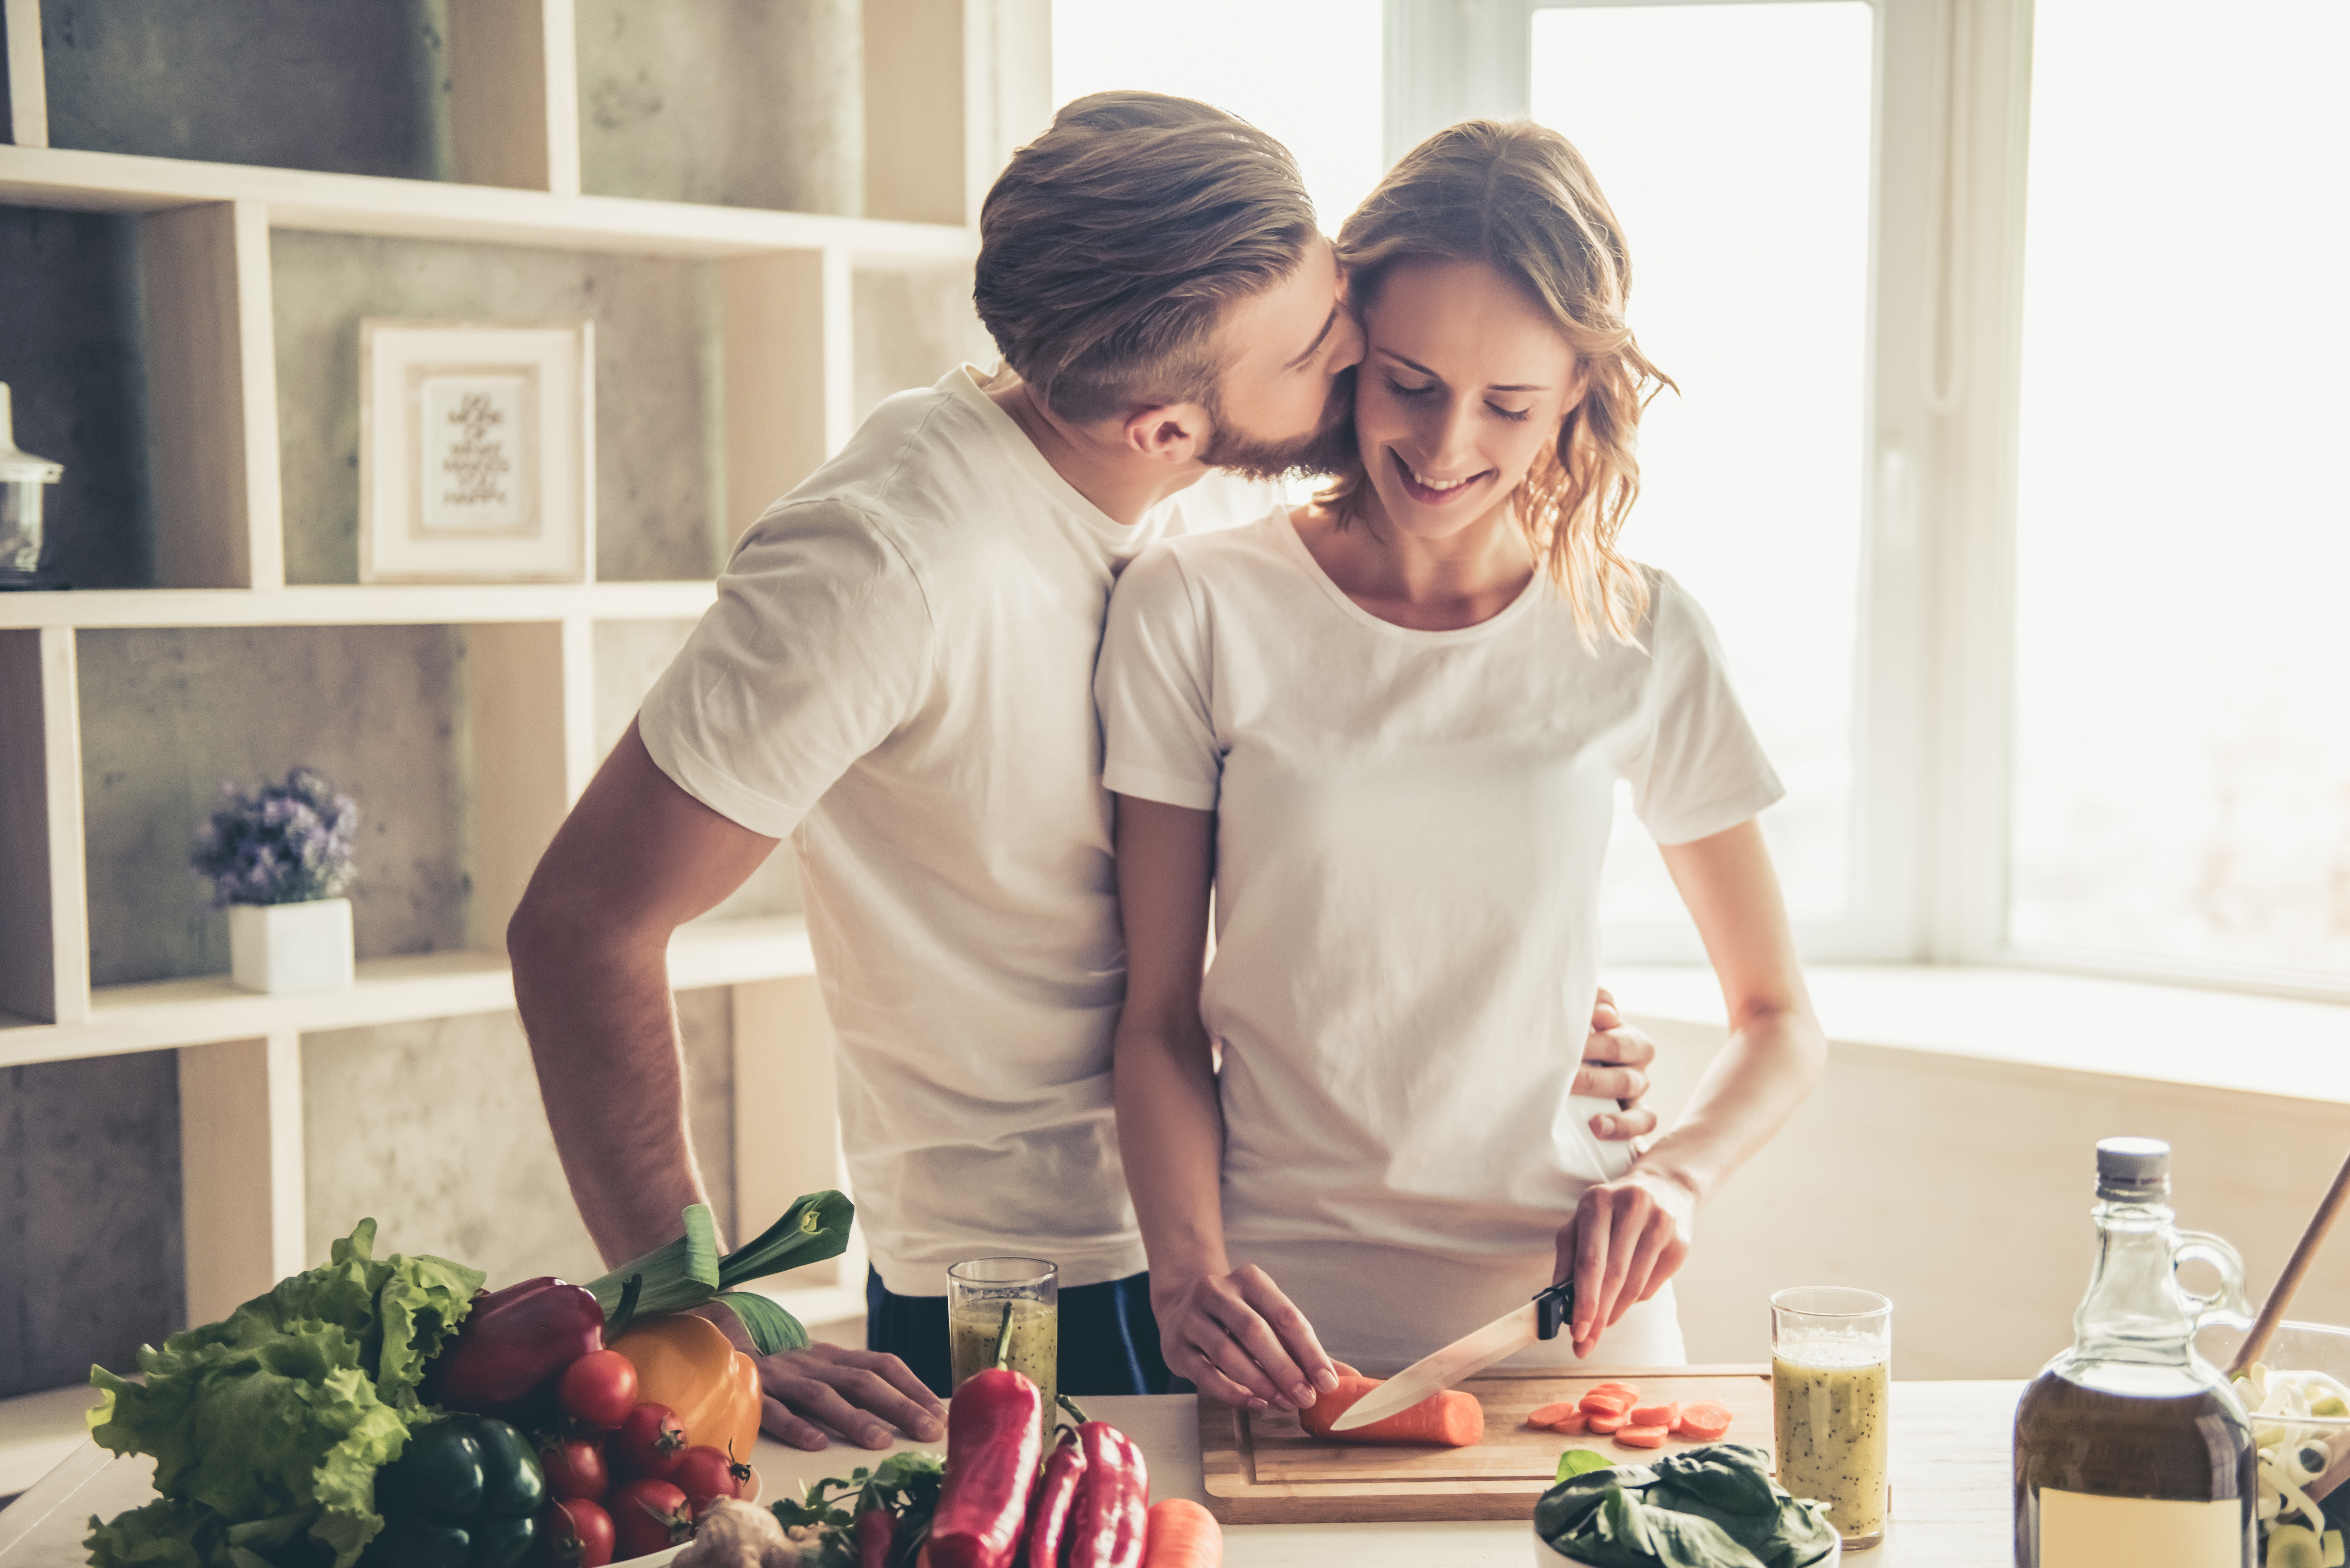 Happy couple bonding while woman cooks | Source: Shutterstock